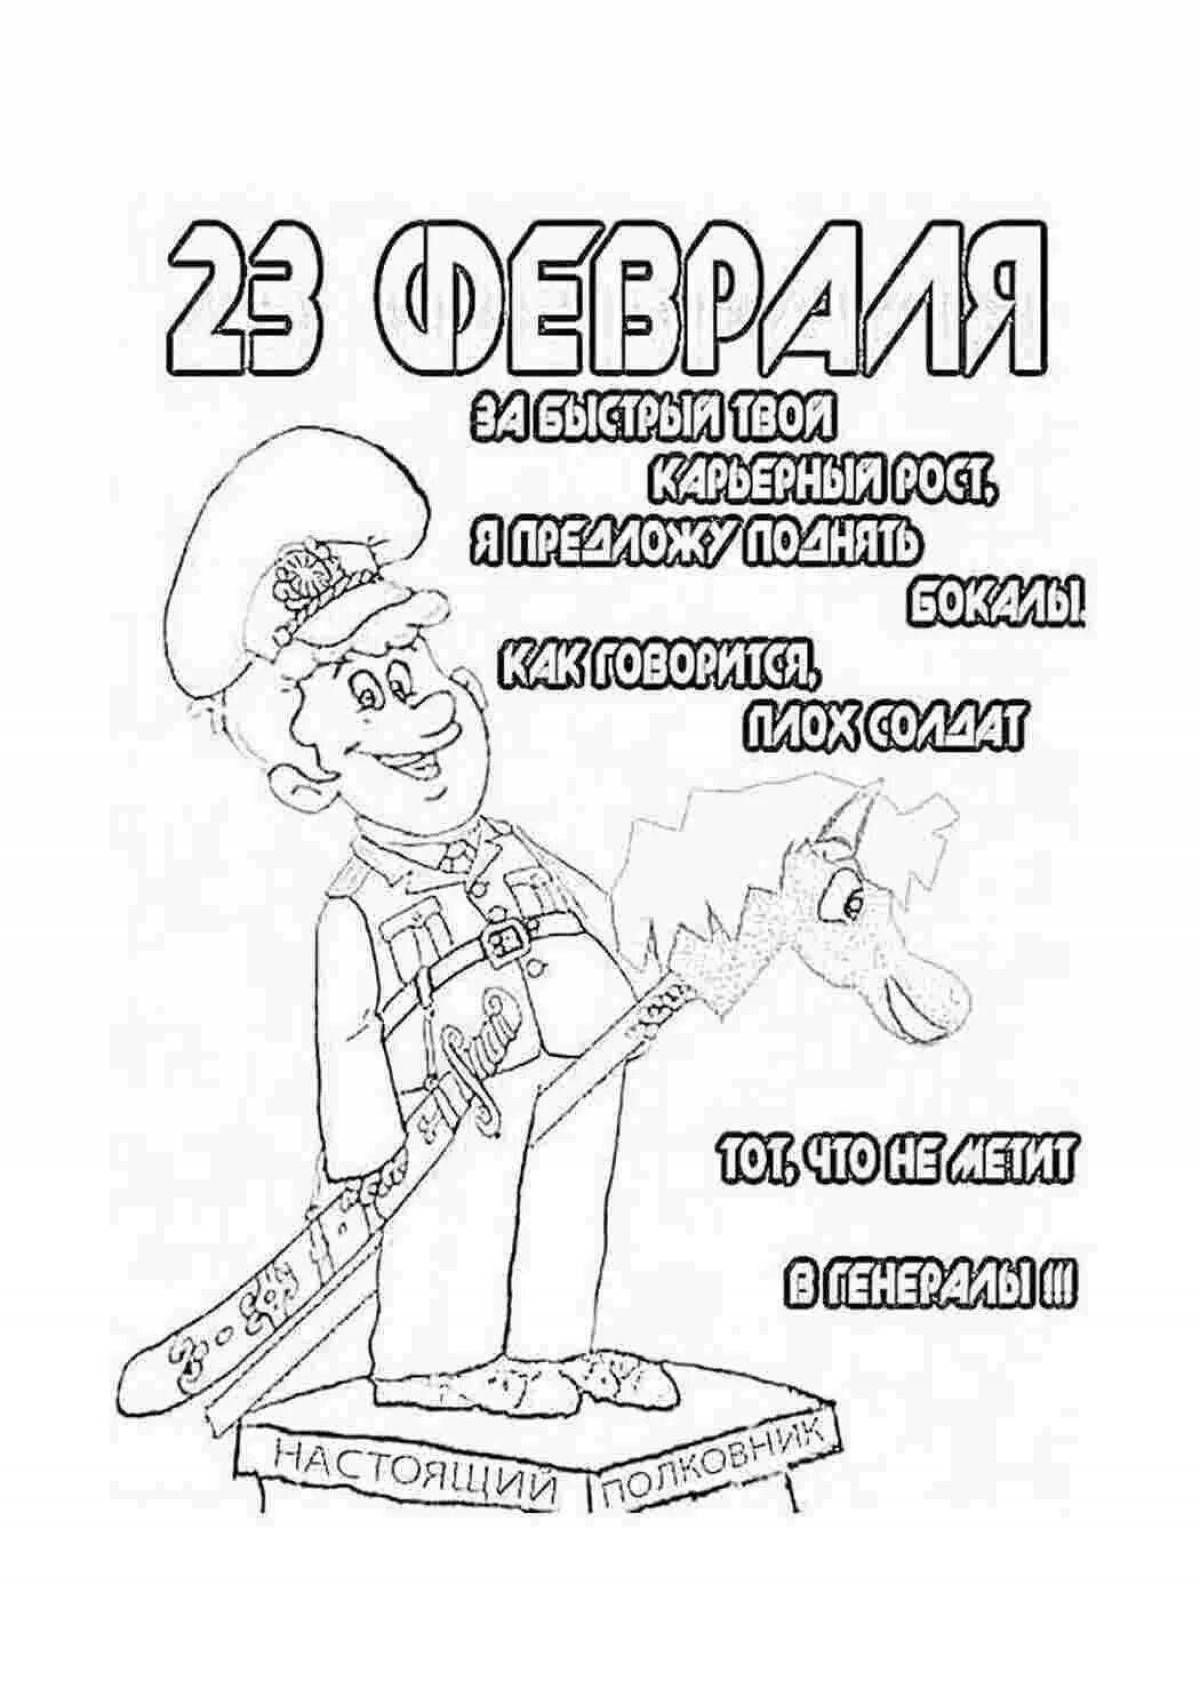 Charming coloring day of the defender of the fatherland